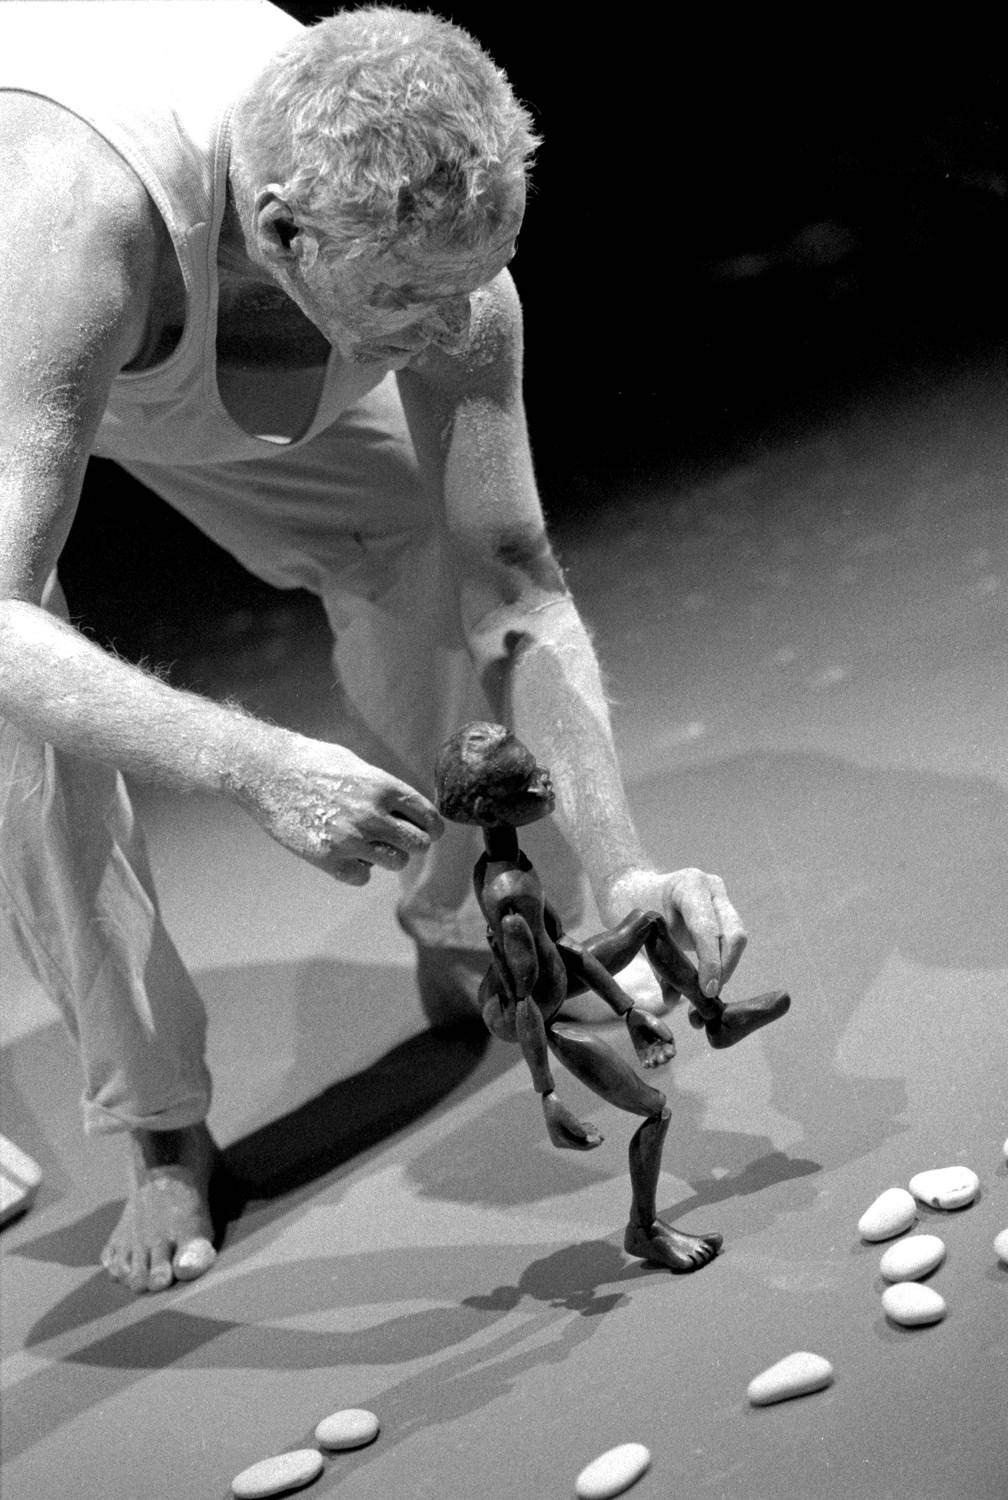 Lift 'Em Up Socks handspan Theatre Rod Primrose puppeteer leaning down to operate Aboriginal boy rod puppet within a stone pattern on the floor